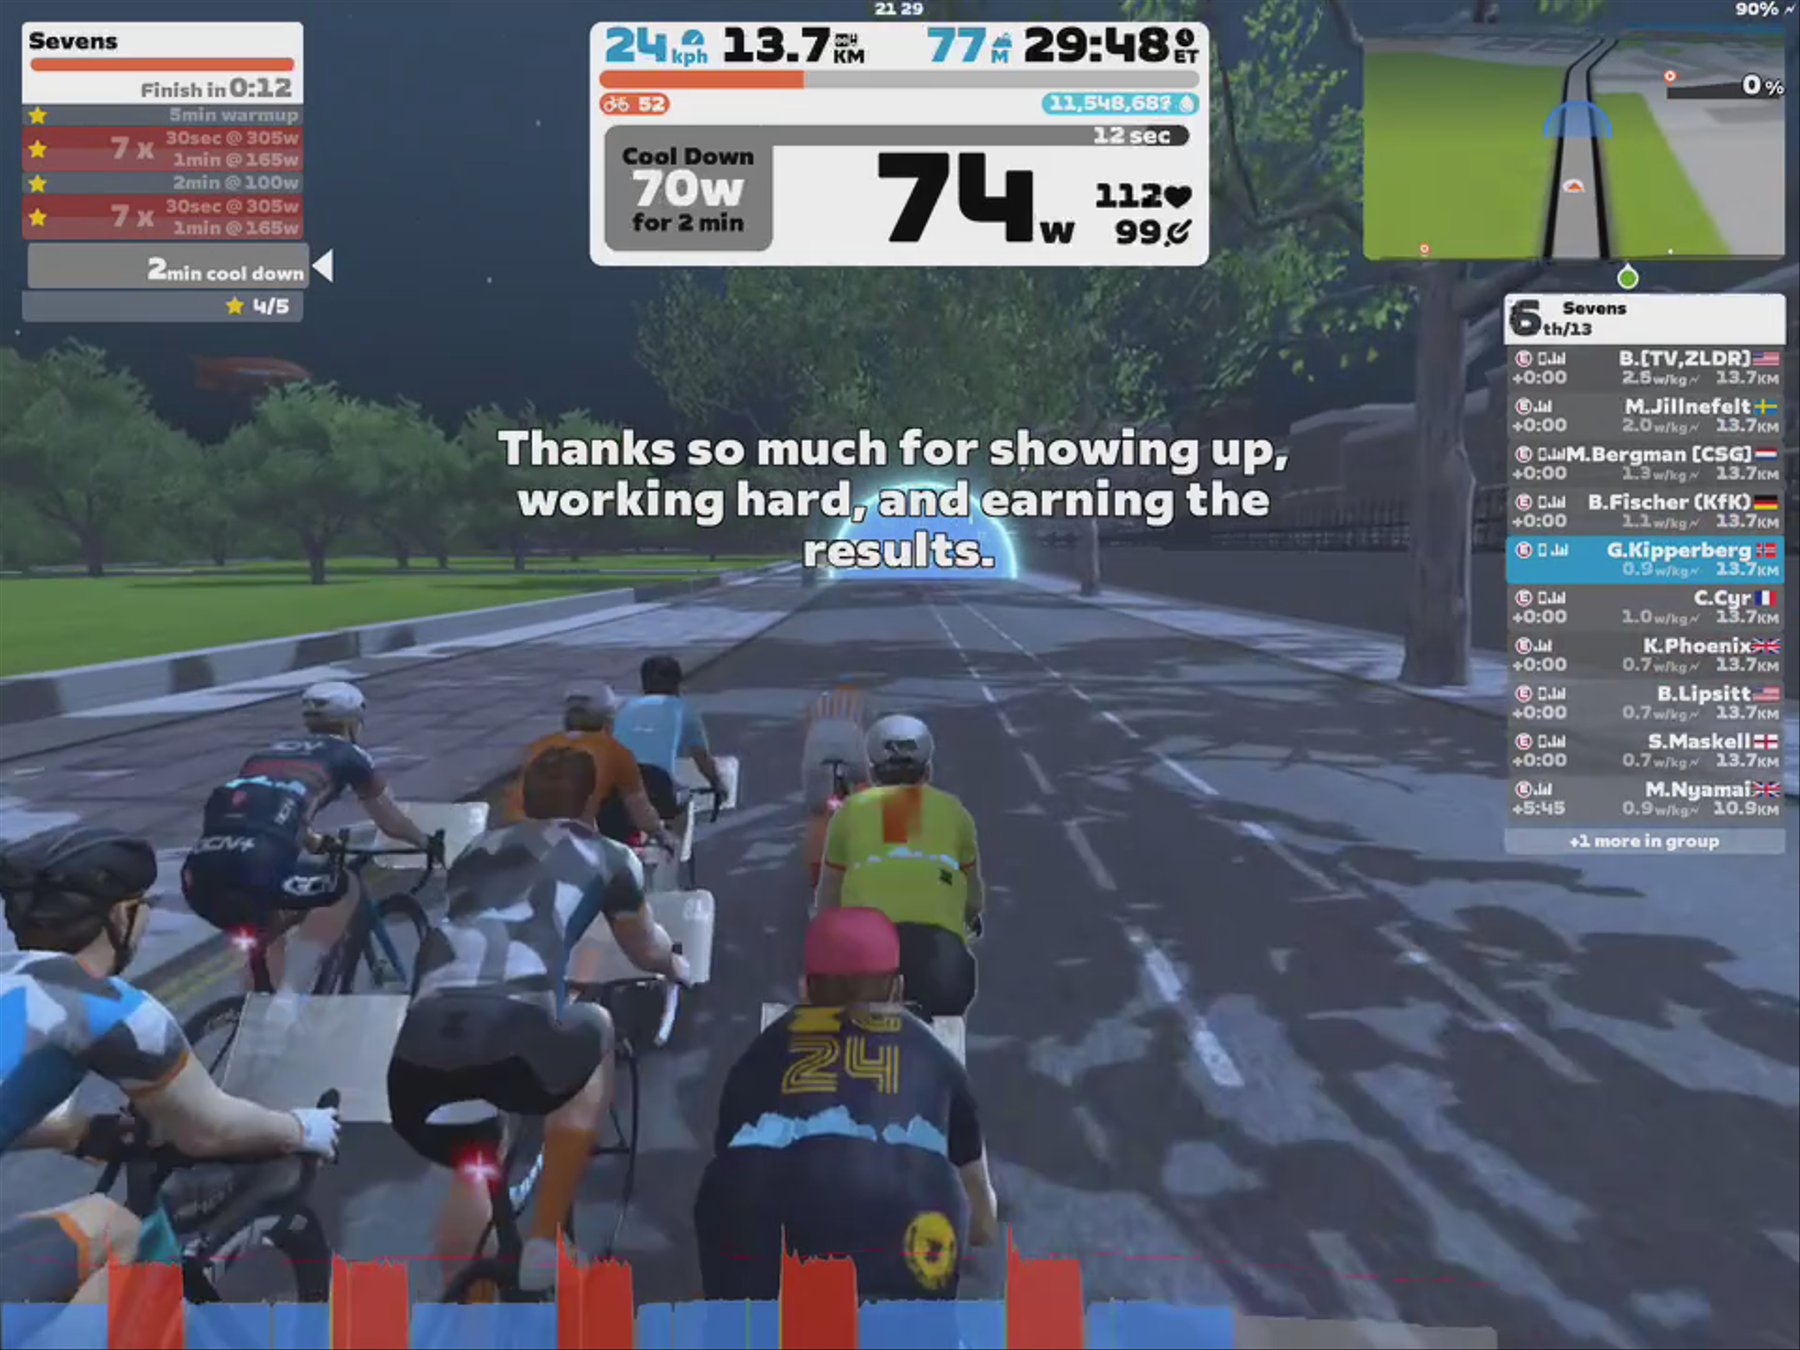 Zwift - Group Workout: Sevens on Classique in London